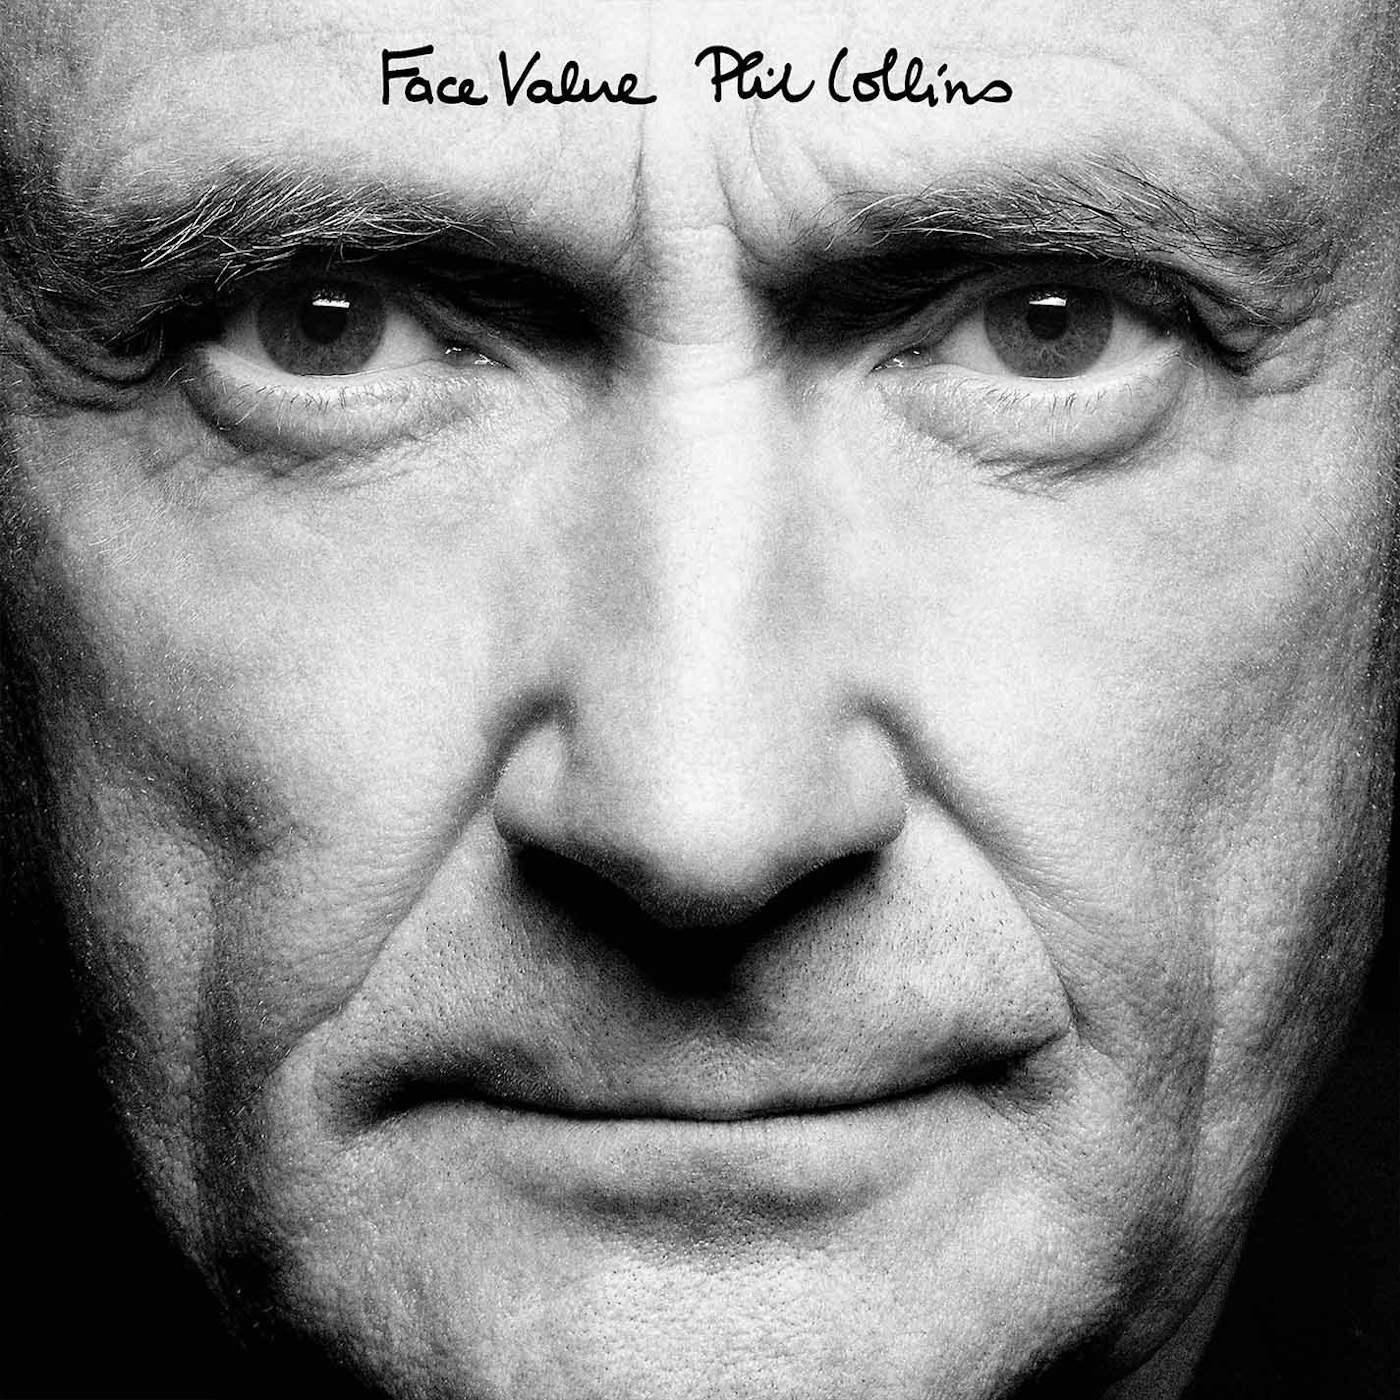 Phil Collins FACE VALUE CD